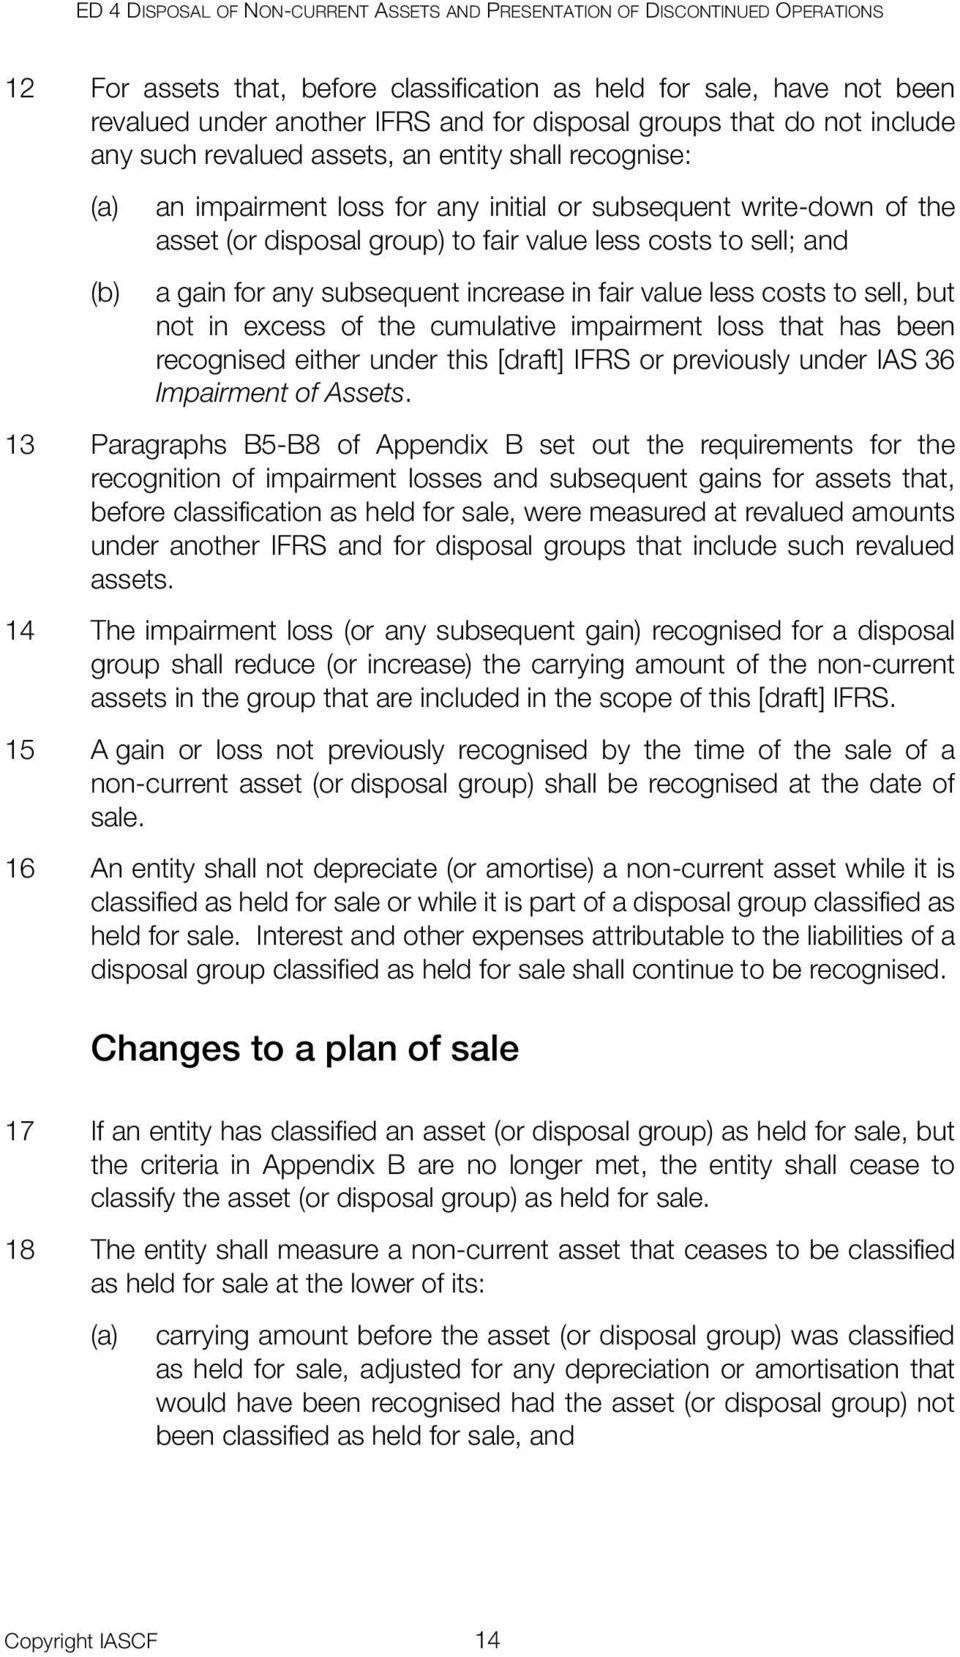 to sell; and a gain for any subsequent increase in fair value less costs to sell, but not in excess of the cumulative impairment loss that has been recognised either under this [draft] IFRS or